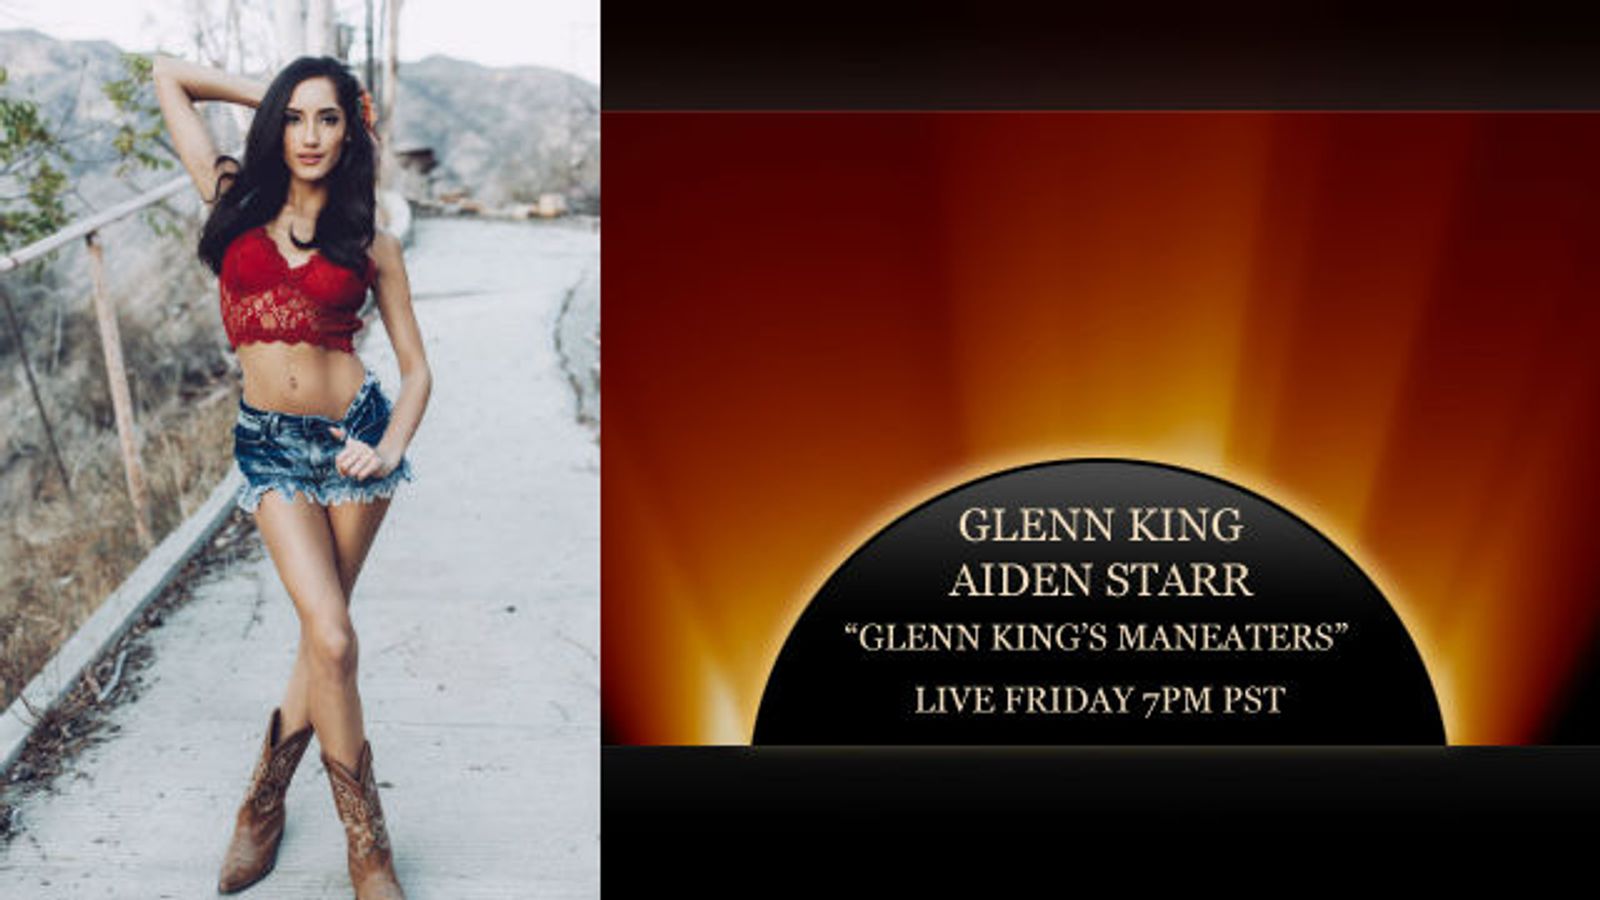 Chloe Amour on Glenn King's “ManEaters Show” This Friday